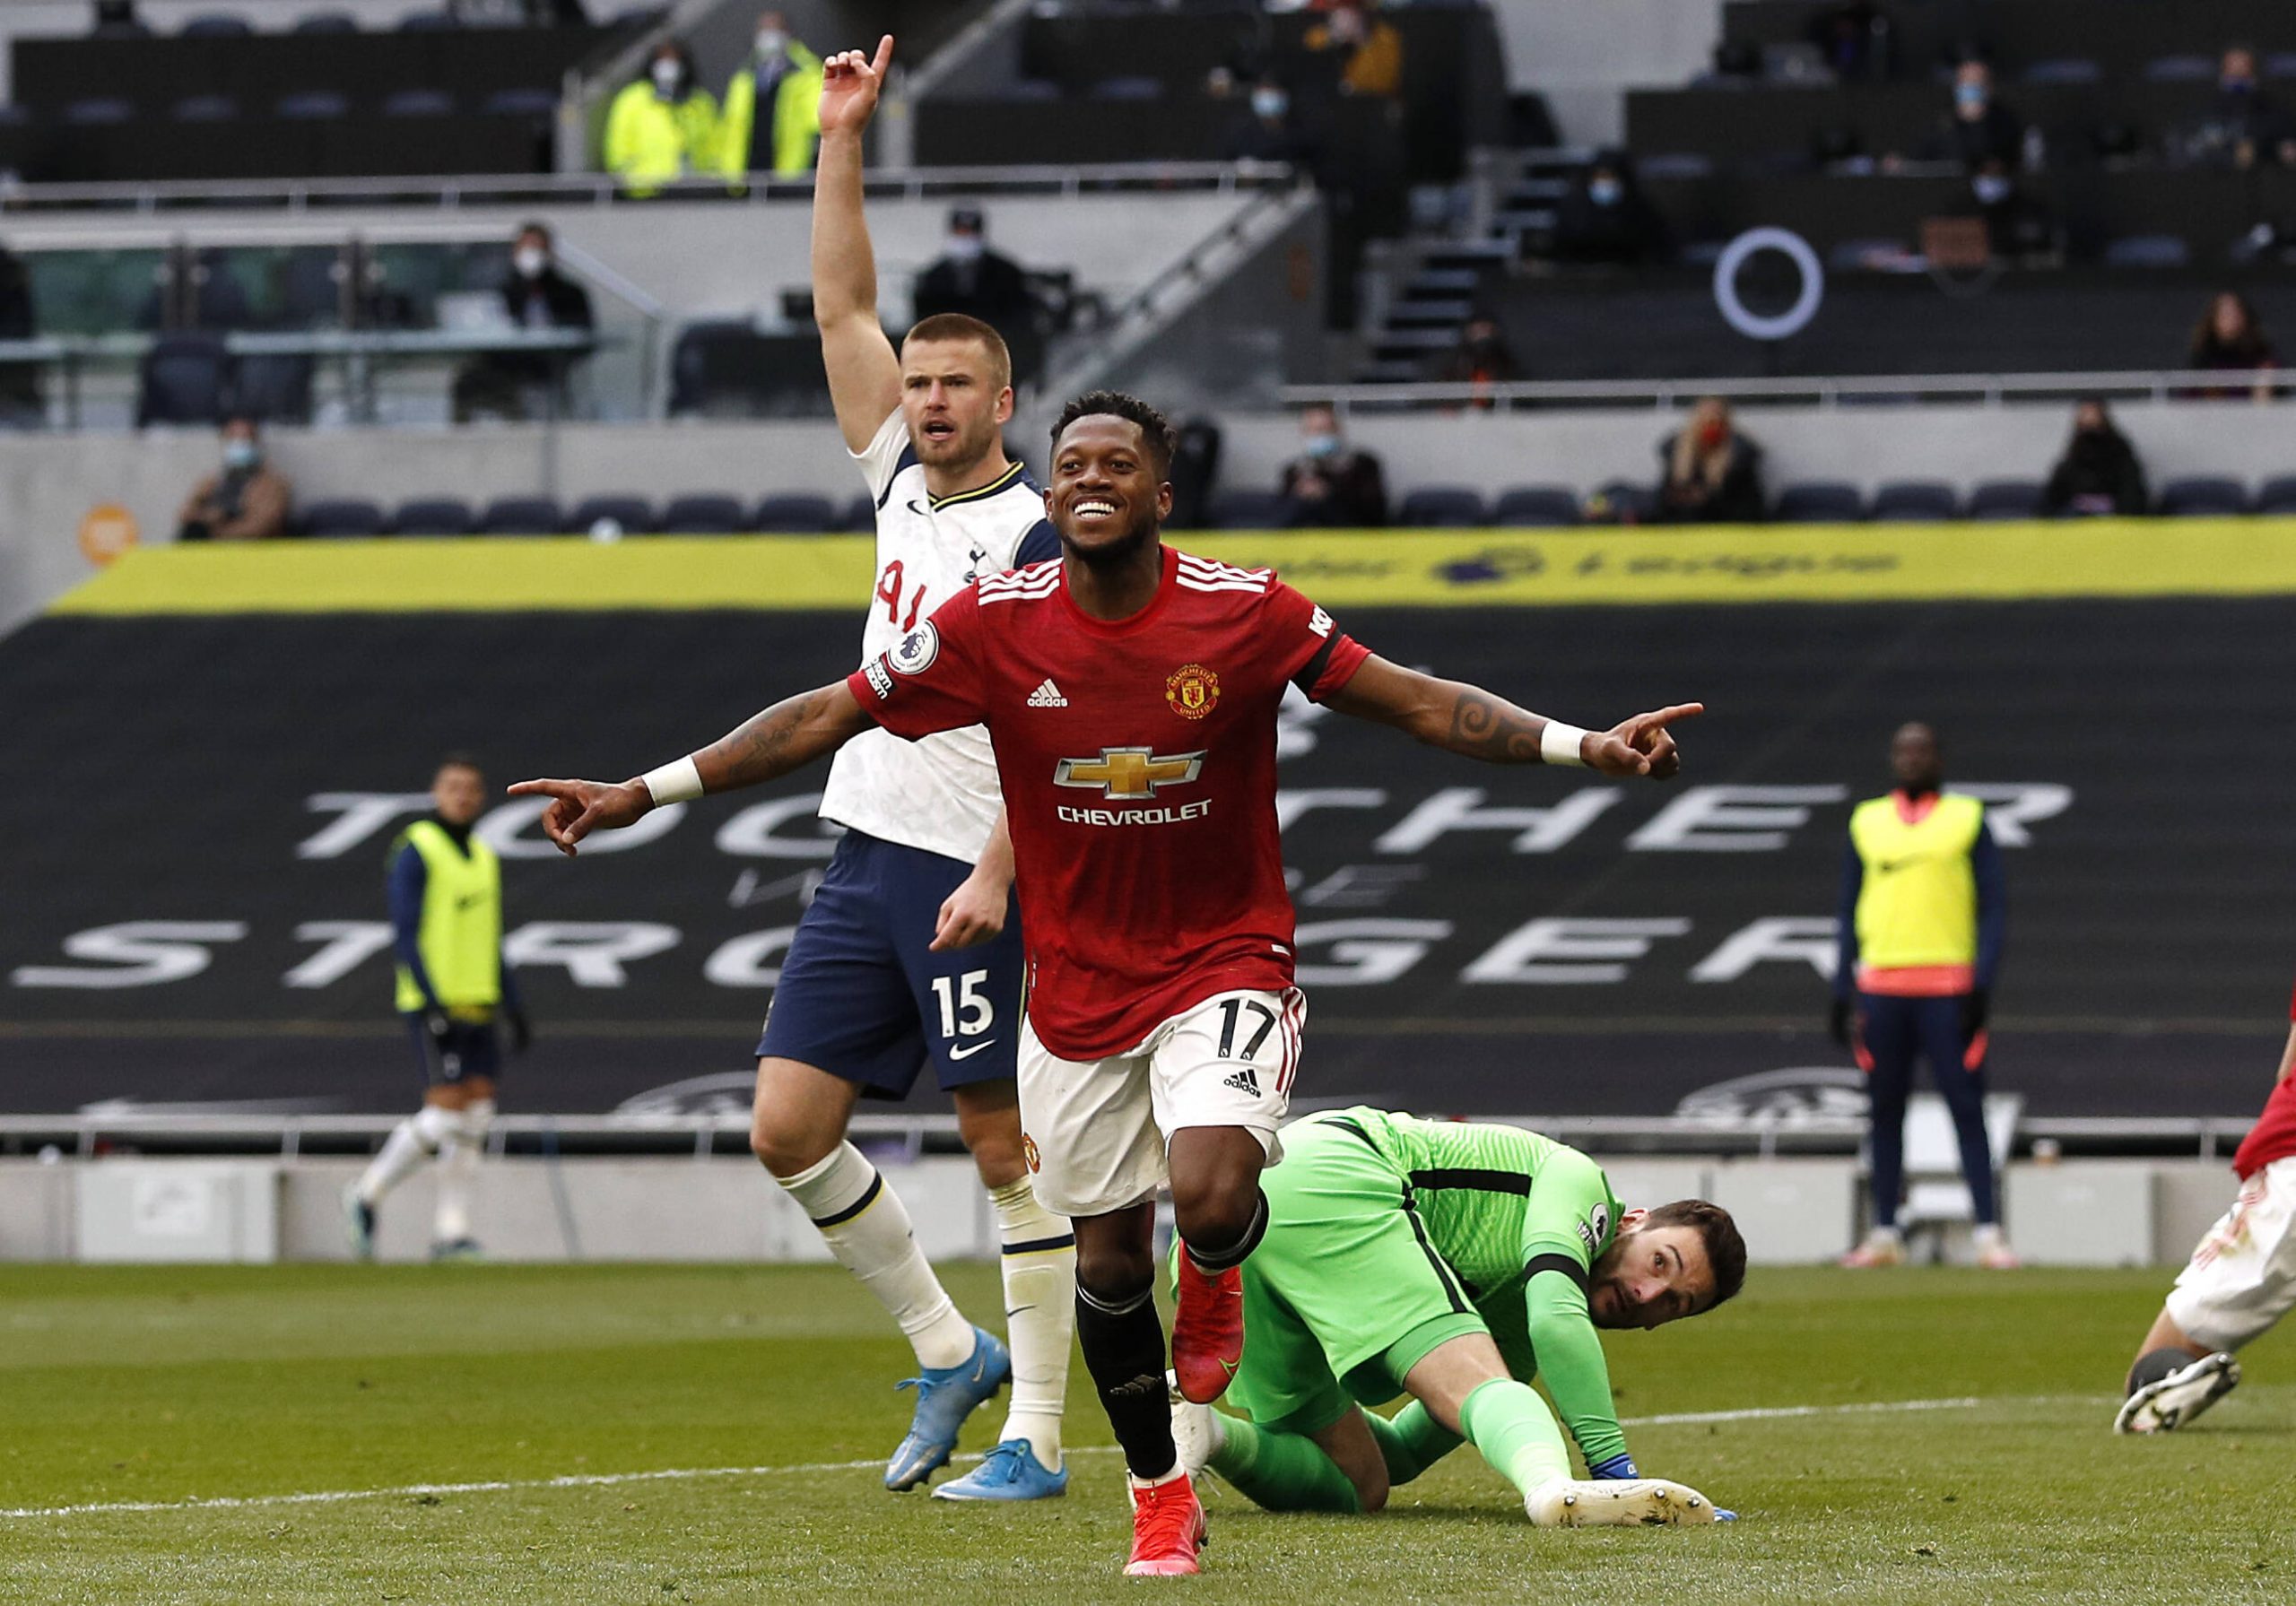 Fred wheels away after scoring an equalizing goal against Spurs in a 3-1 win. (imago Images)